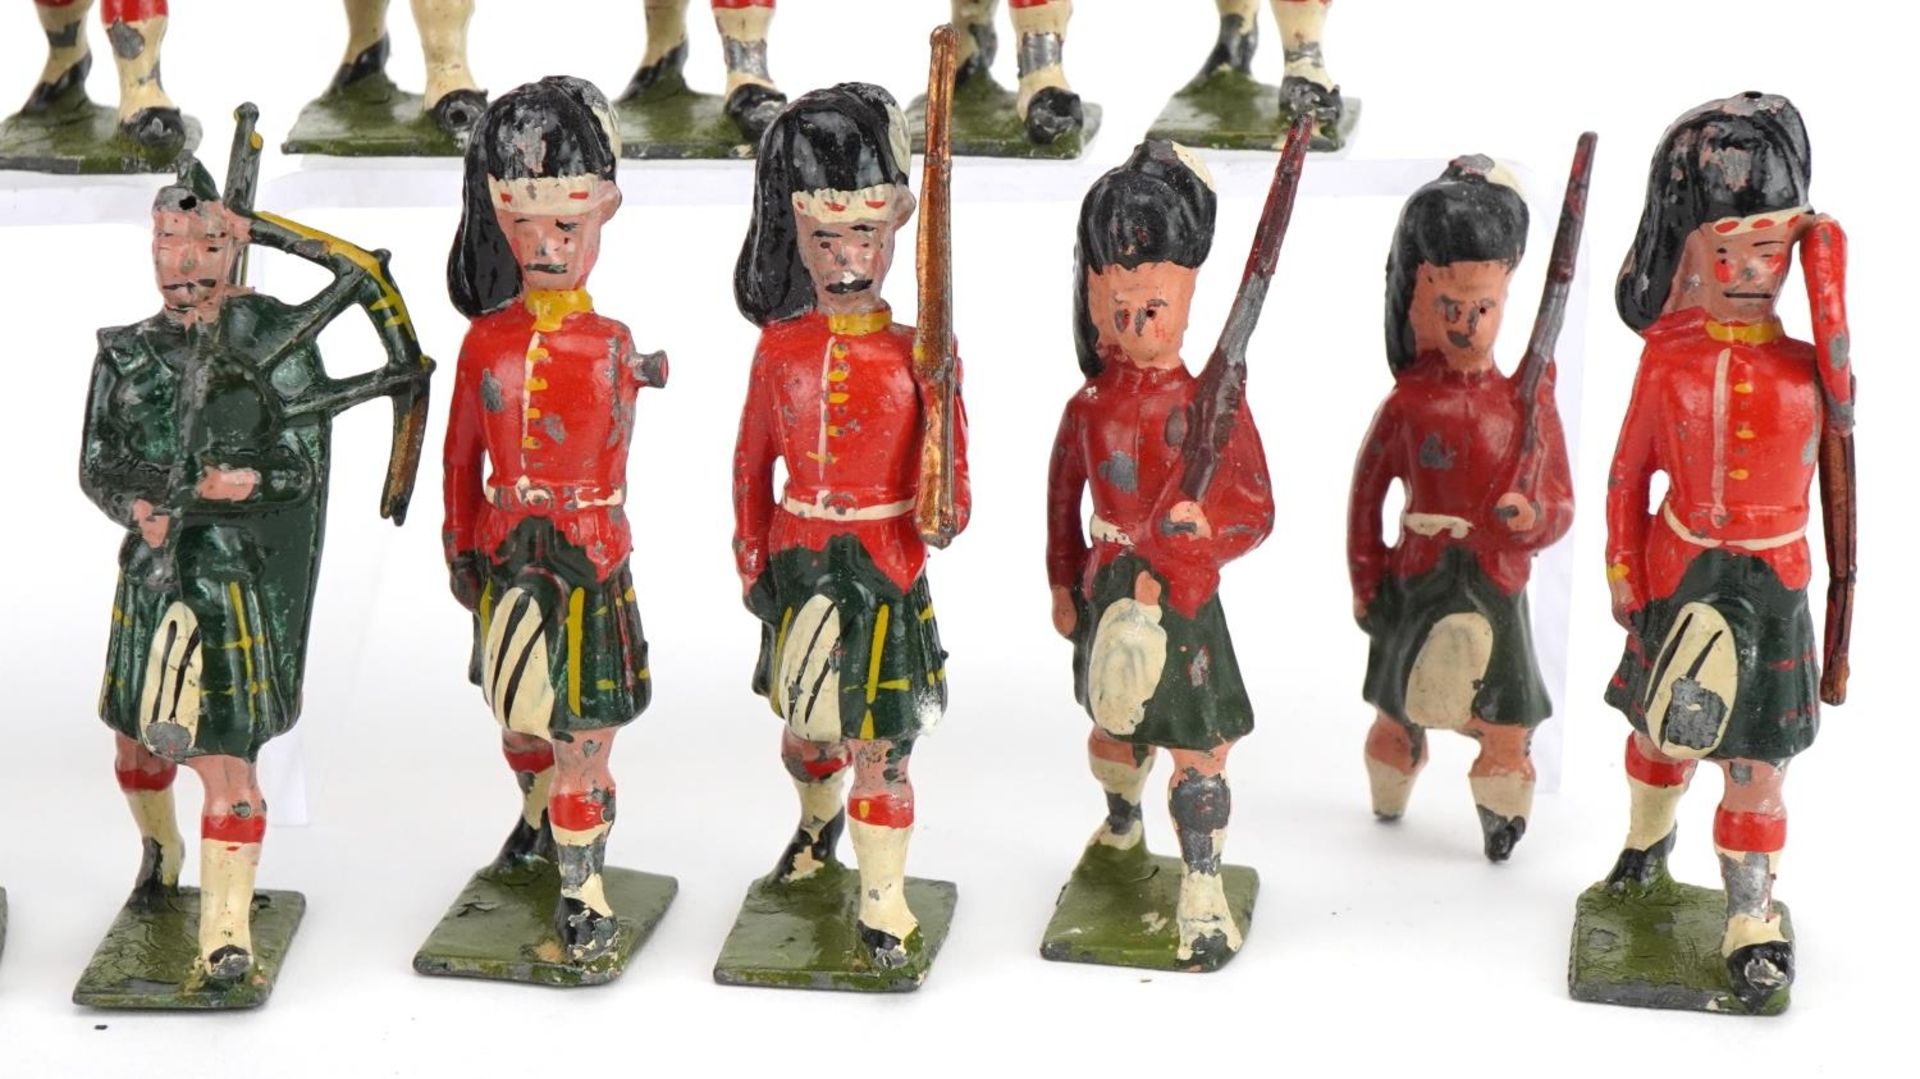 Nineteen Britains hand painted lead Gordon Highlanders soldiers and piper, some with articulated - Image 6 of 8